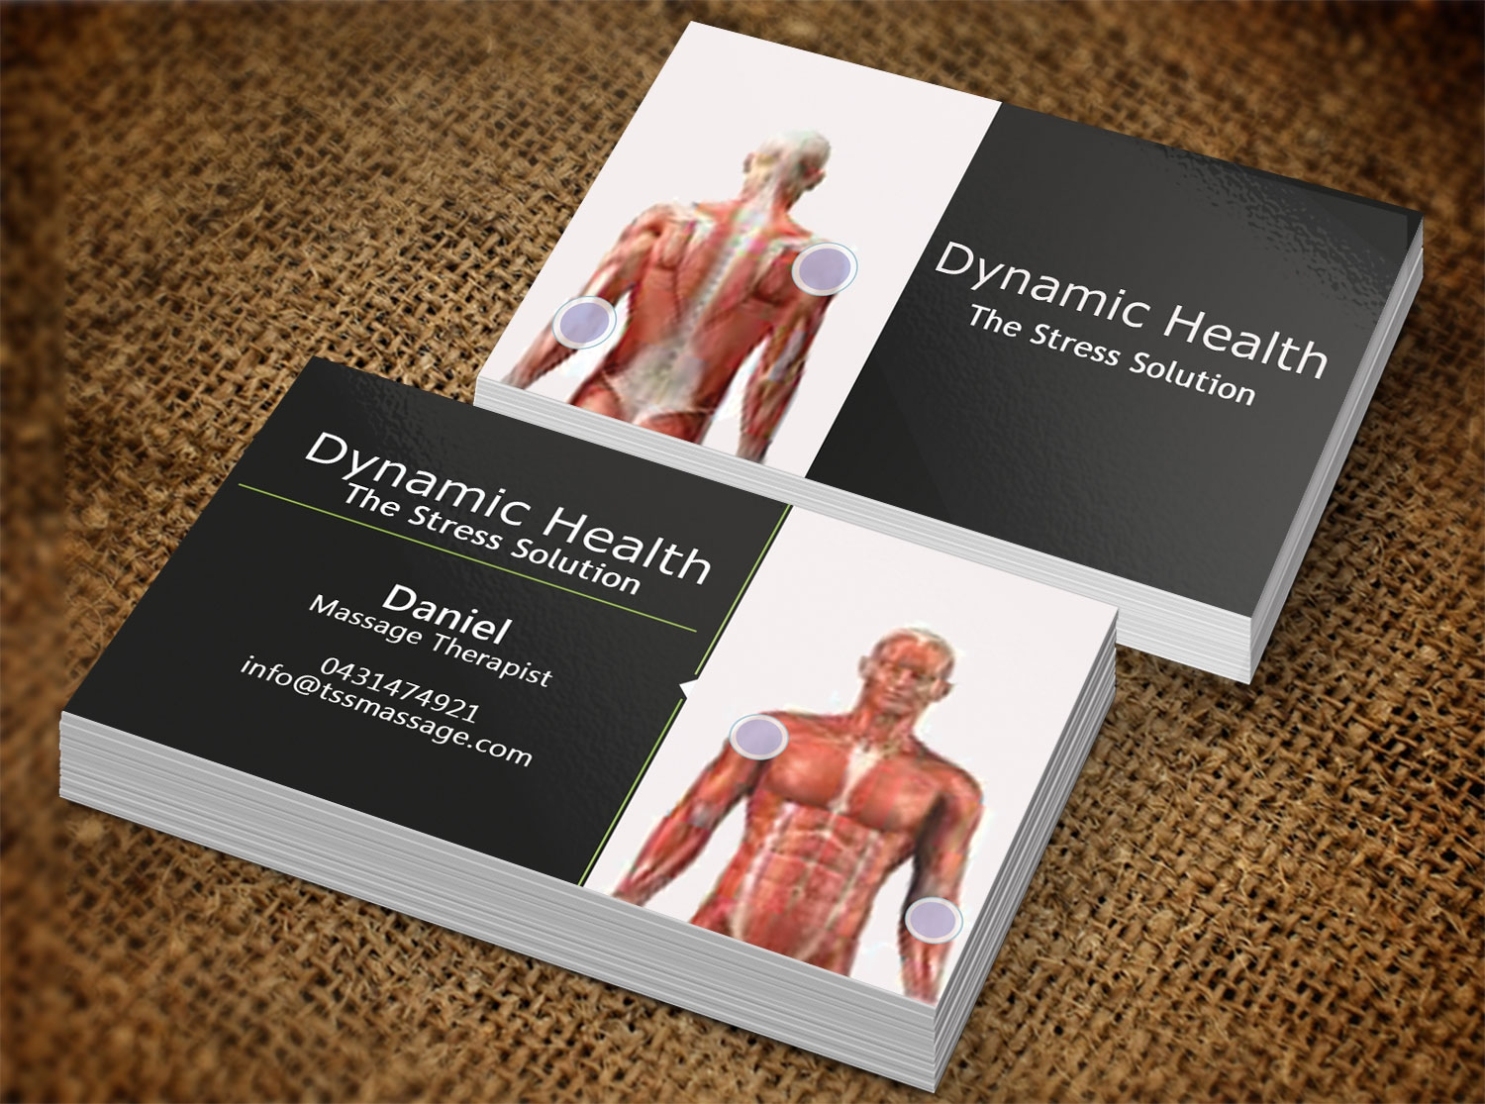 Massage Therapy Business Cards : Massage Business Cards | Zazzle / 3.5 intended for Massage Therapy Business Card Templates